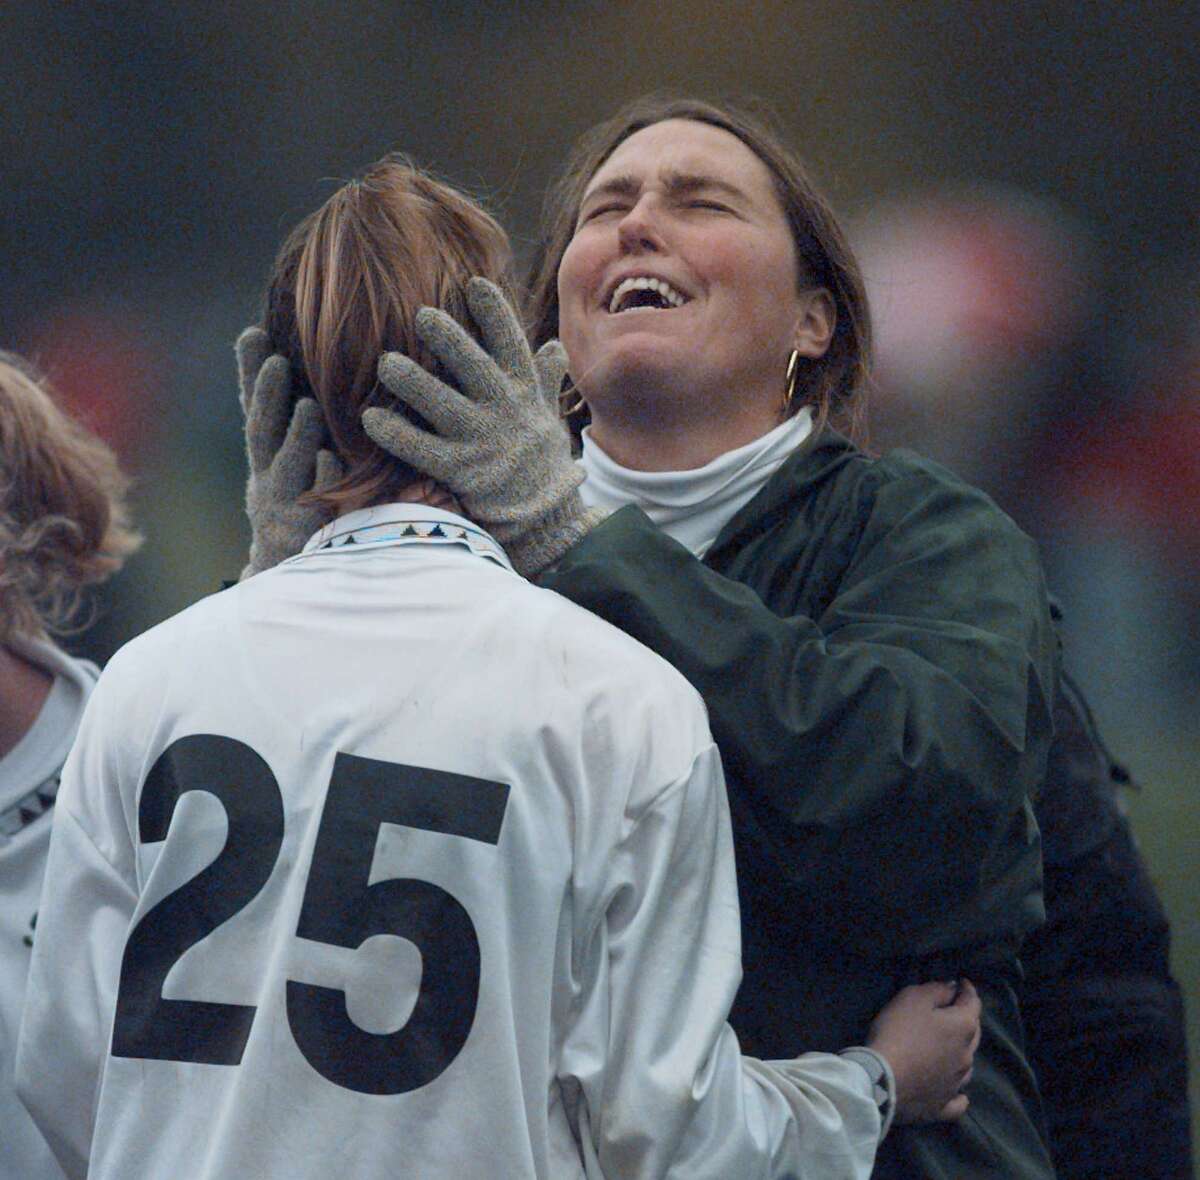 TIMES UNION PHOTO BY LUANNE M. FERRIS — SATURDAY, NOV. 1, 1997, CLIFTON PARK, CLIFTON COMMONS SOCCER FIELD. Shenendehowa Assistant Coach Betsy Drambour celebrates with Shenendehowa's Erin Lilly after Shenendehowa won the Section II, Class A girls soccer finals1-0 over Niskayuna.